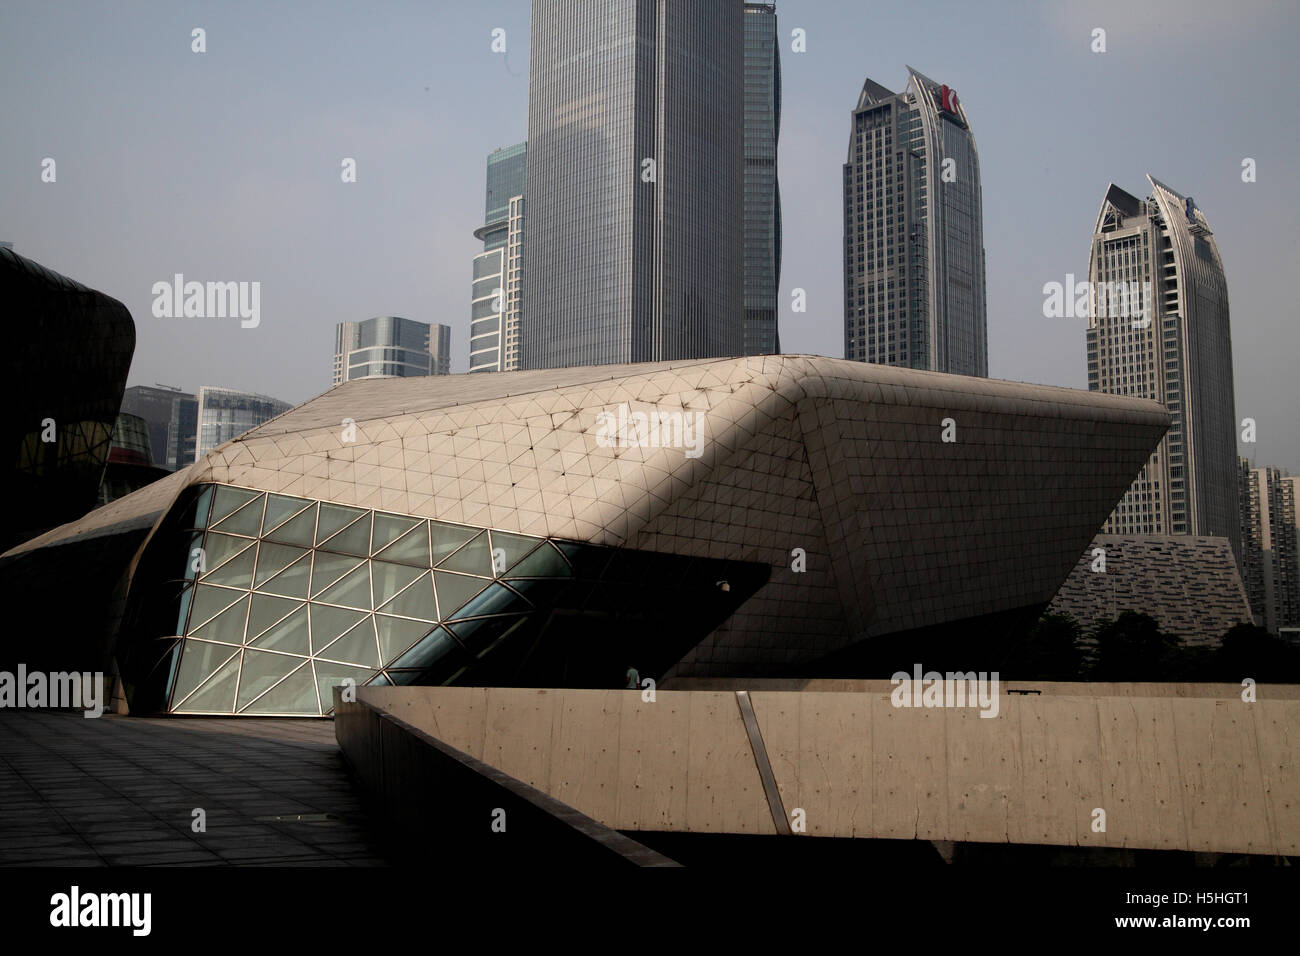 The top part of the Guangzhou Opera House designed by Zaha Hadid and three commercial high rise builldings behind it. Guangzhou. Stock Photo